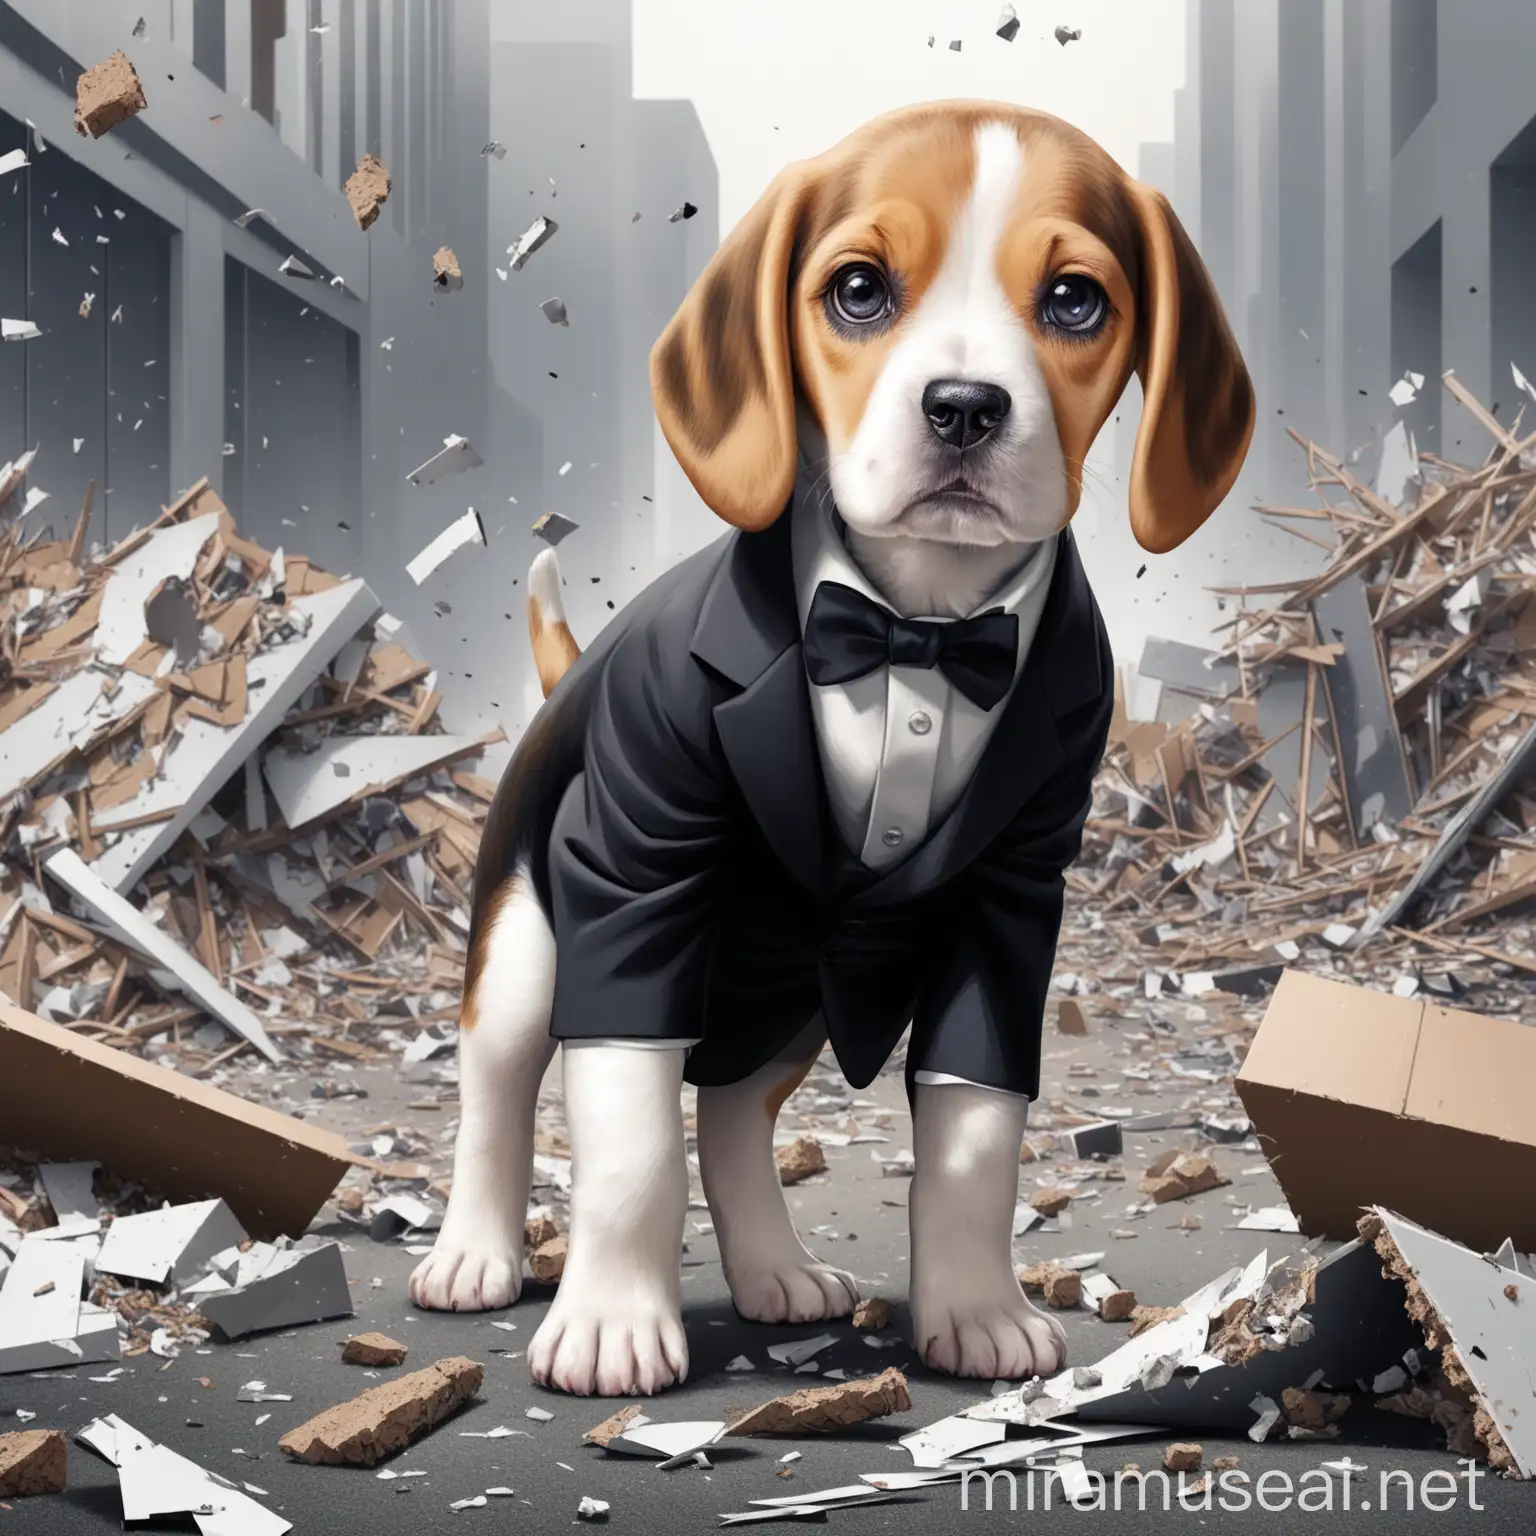 BROKE BEAGLE PUPPY IN SUIT STANDING UP WITH CONTINOUS HOARDING DEBRIS